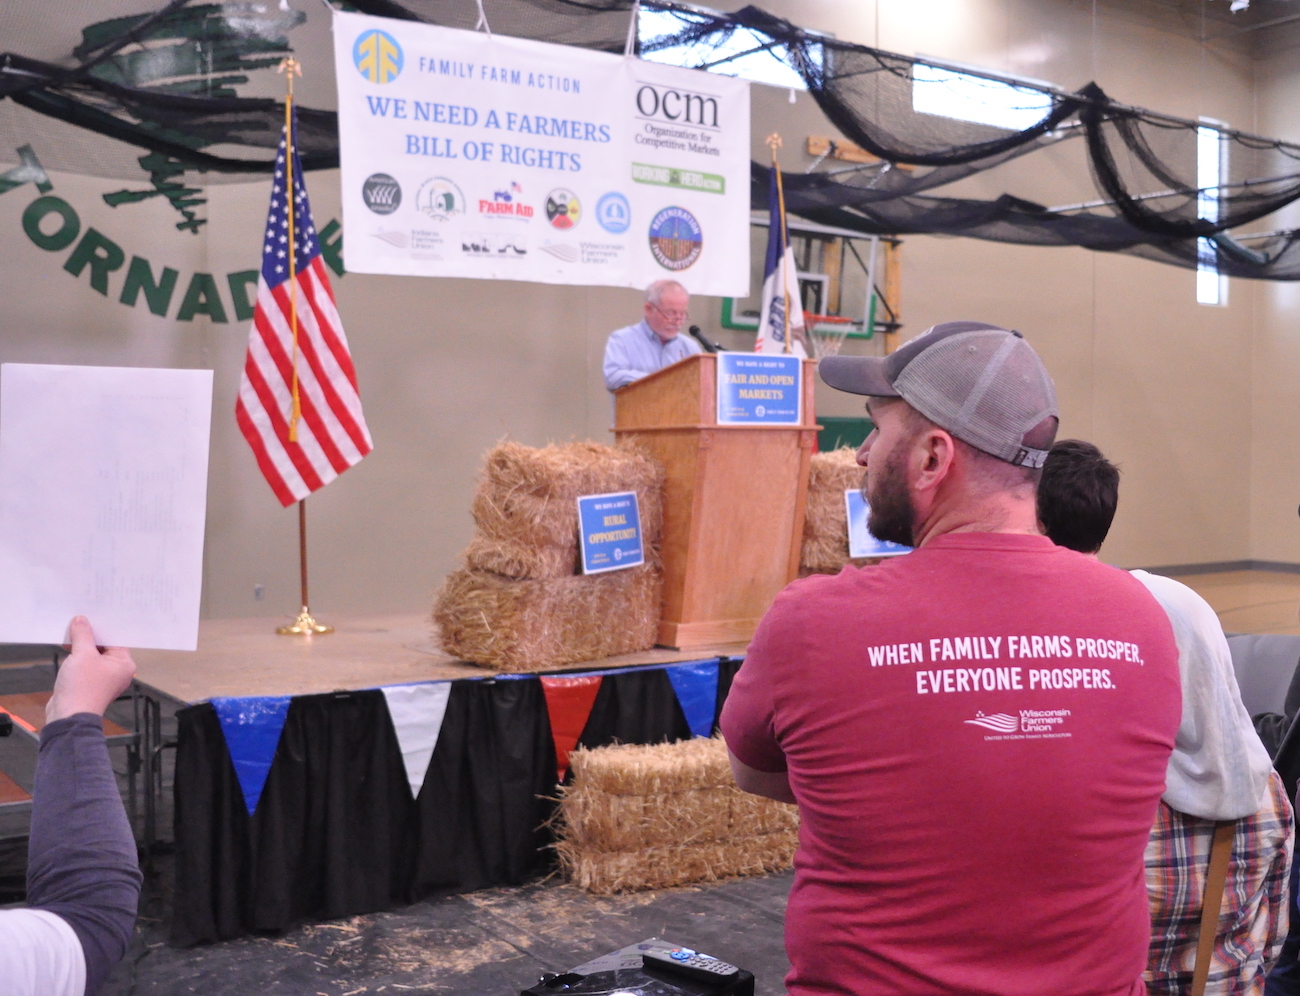 In Storm Lake, Iowa, farmers press candidates for better policy that works for farmers, not industry. Credit: Christopher Walljasper, April 2019